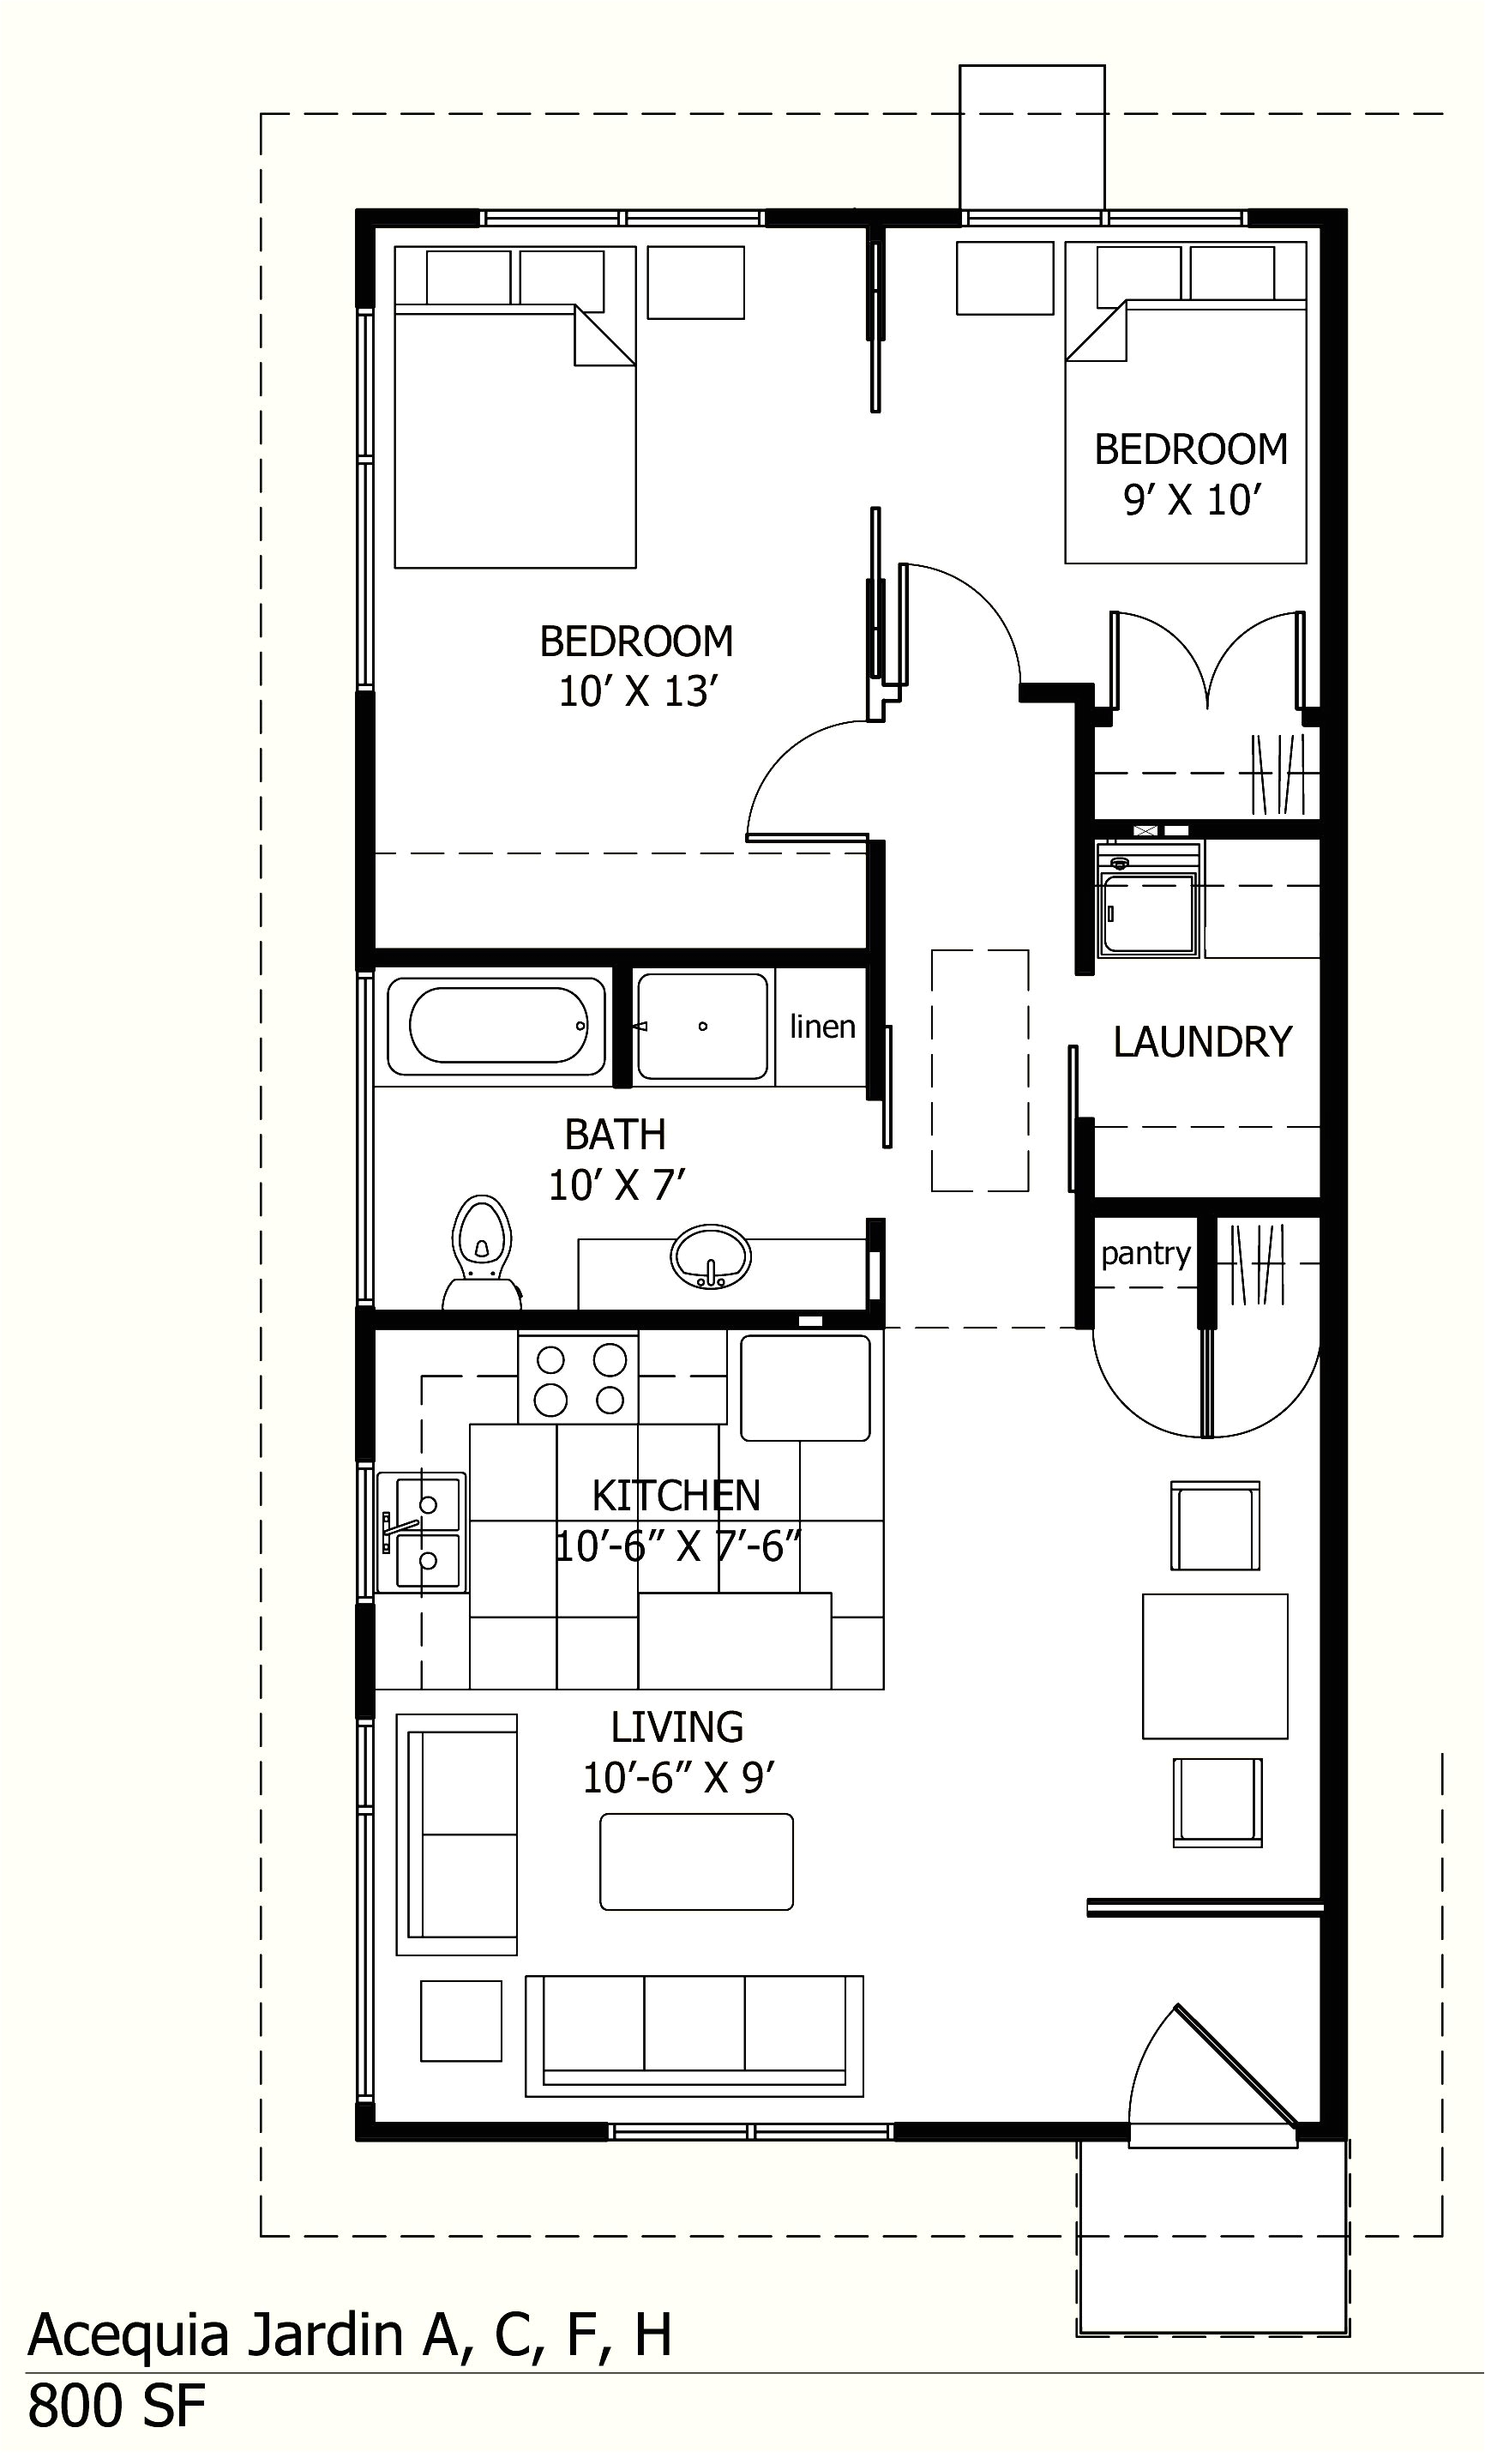 One Bedroom House Plans 1000 Square Feet I Like This One because there is A Laundry Room 800 Sq Ft Floor